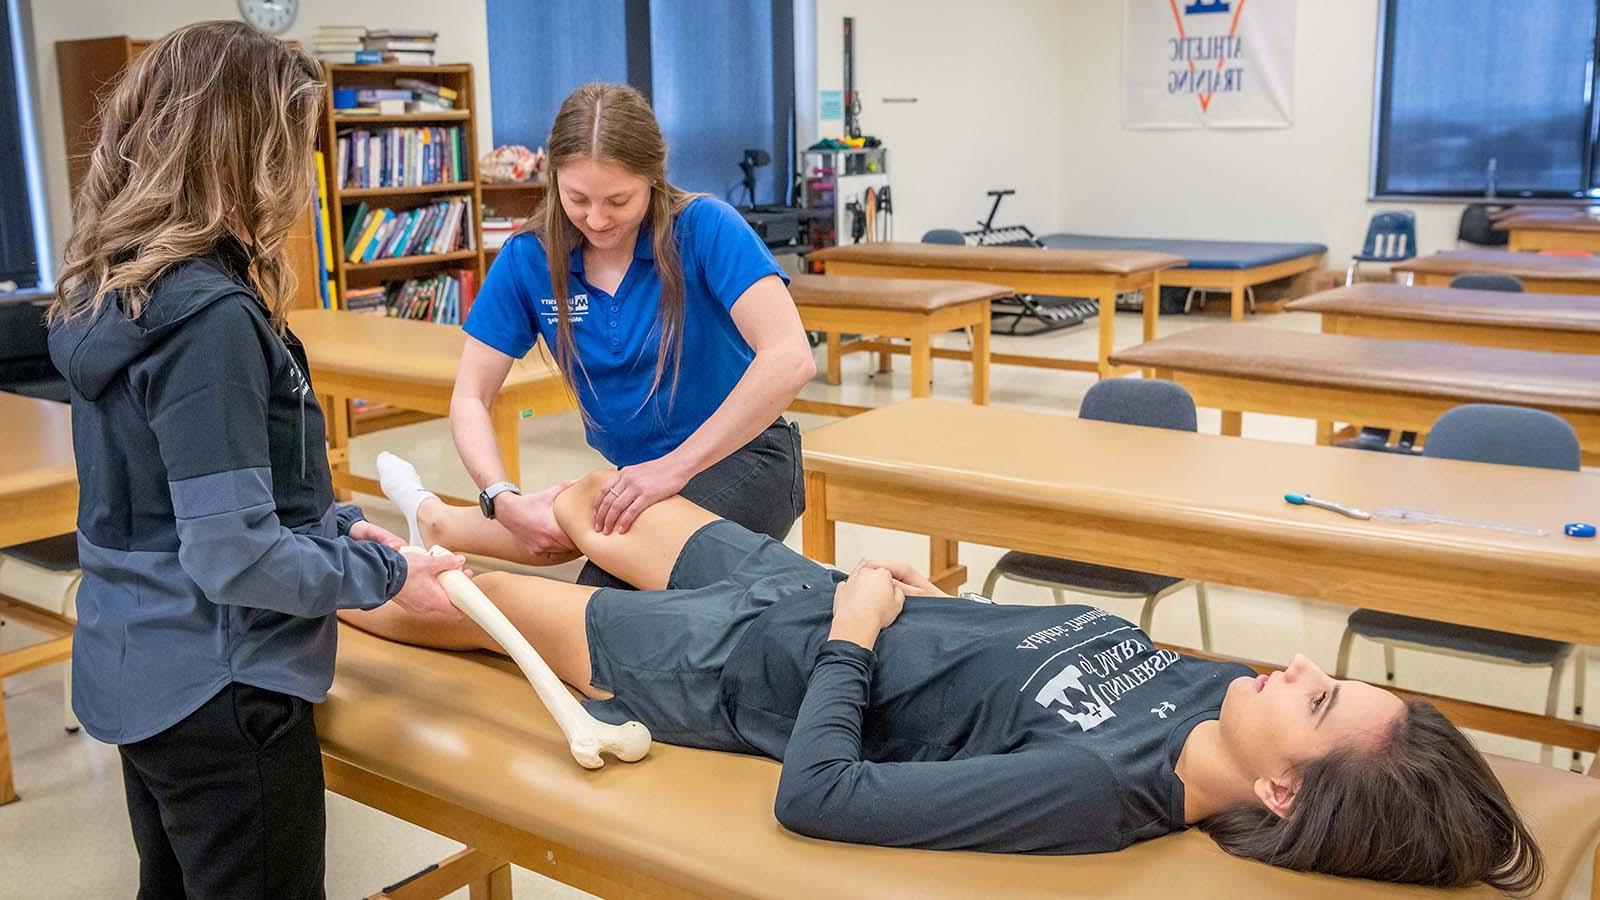 Athletic training student completing an 评估 on athlete’s knee while instructor is watching